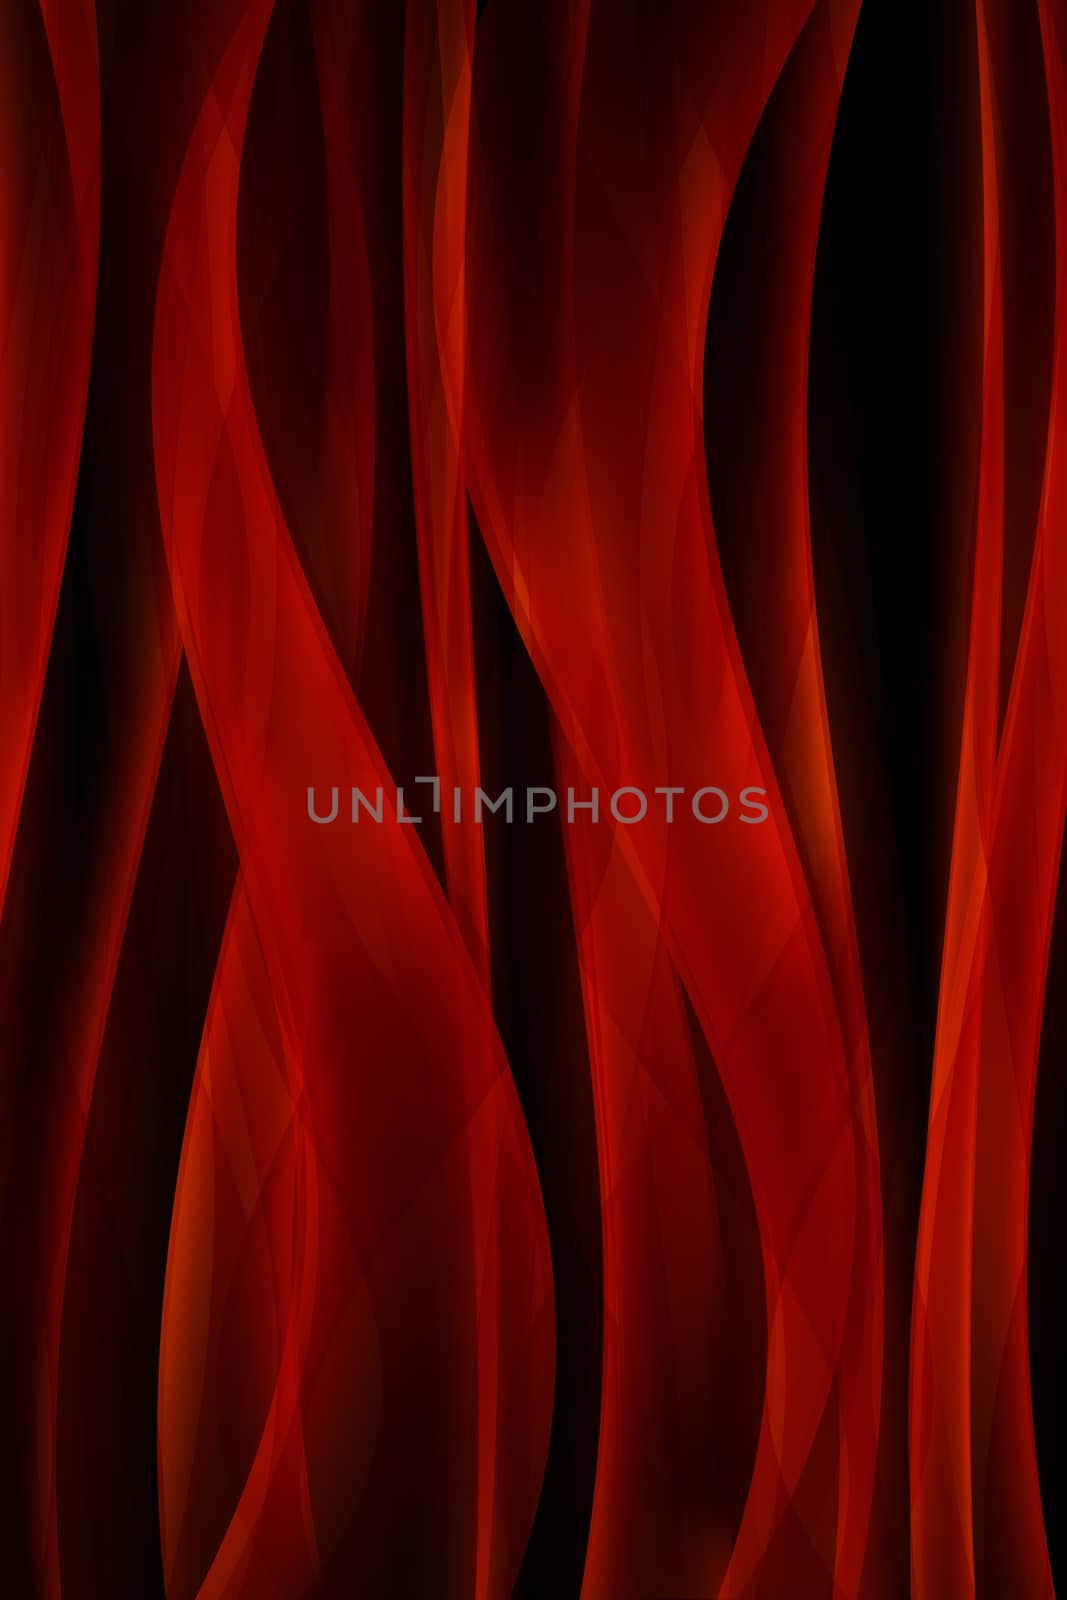 Dark Red Flames Abstract Vertical Background. Red Flames on Black.